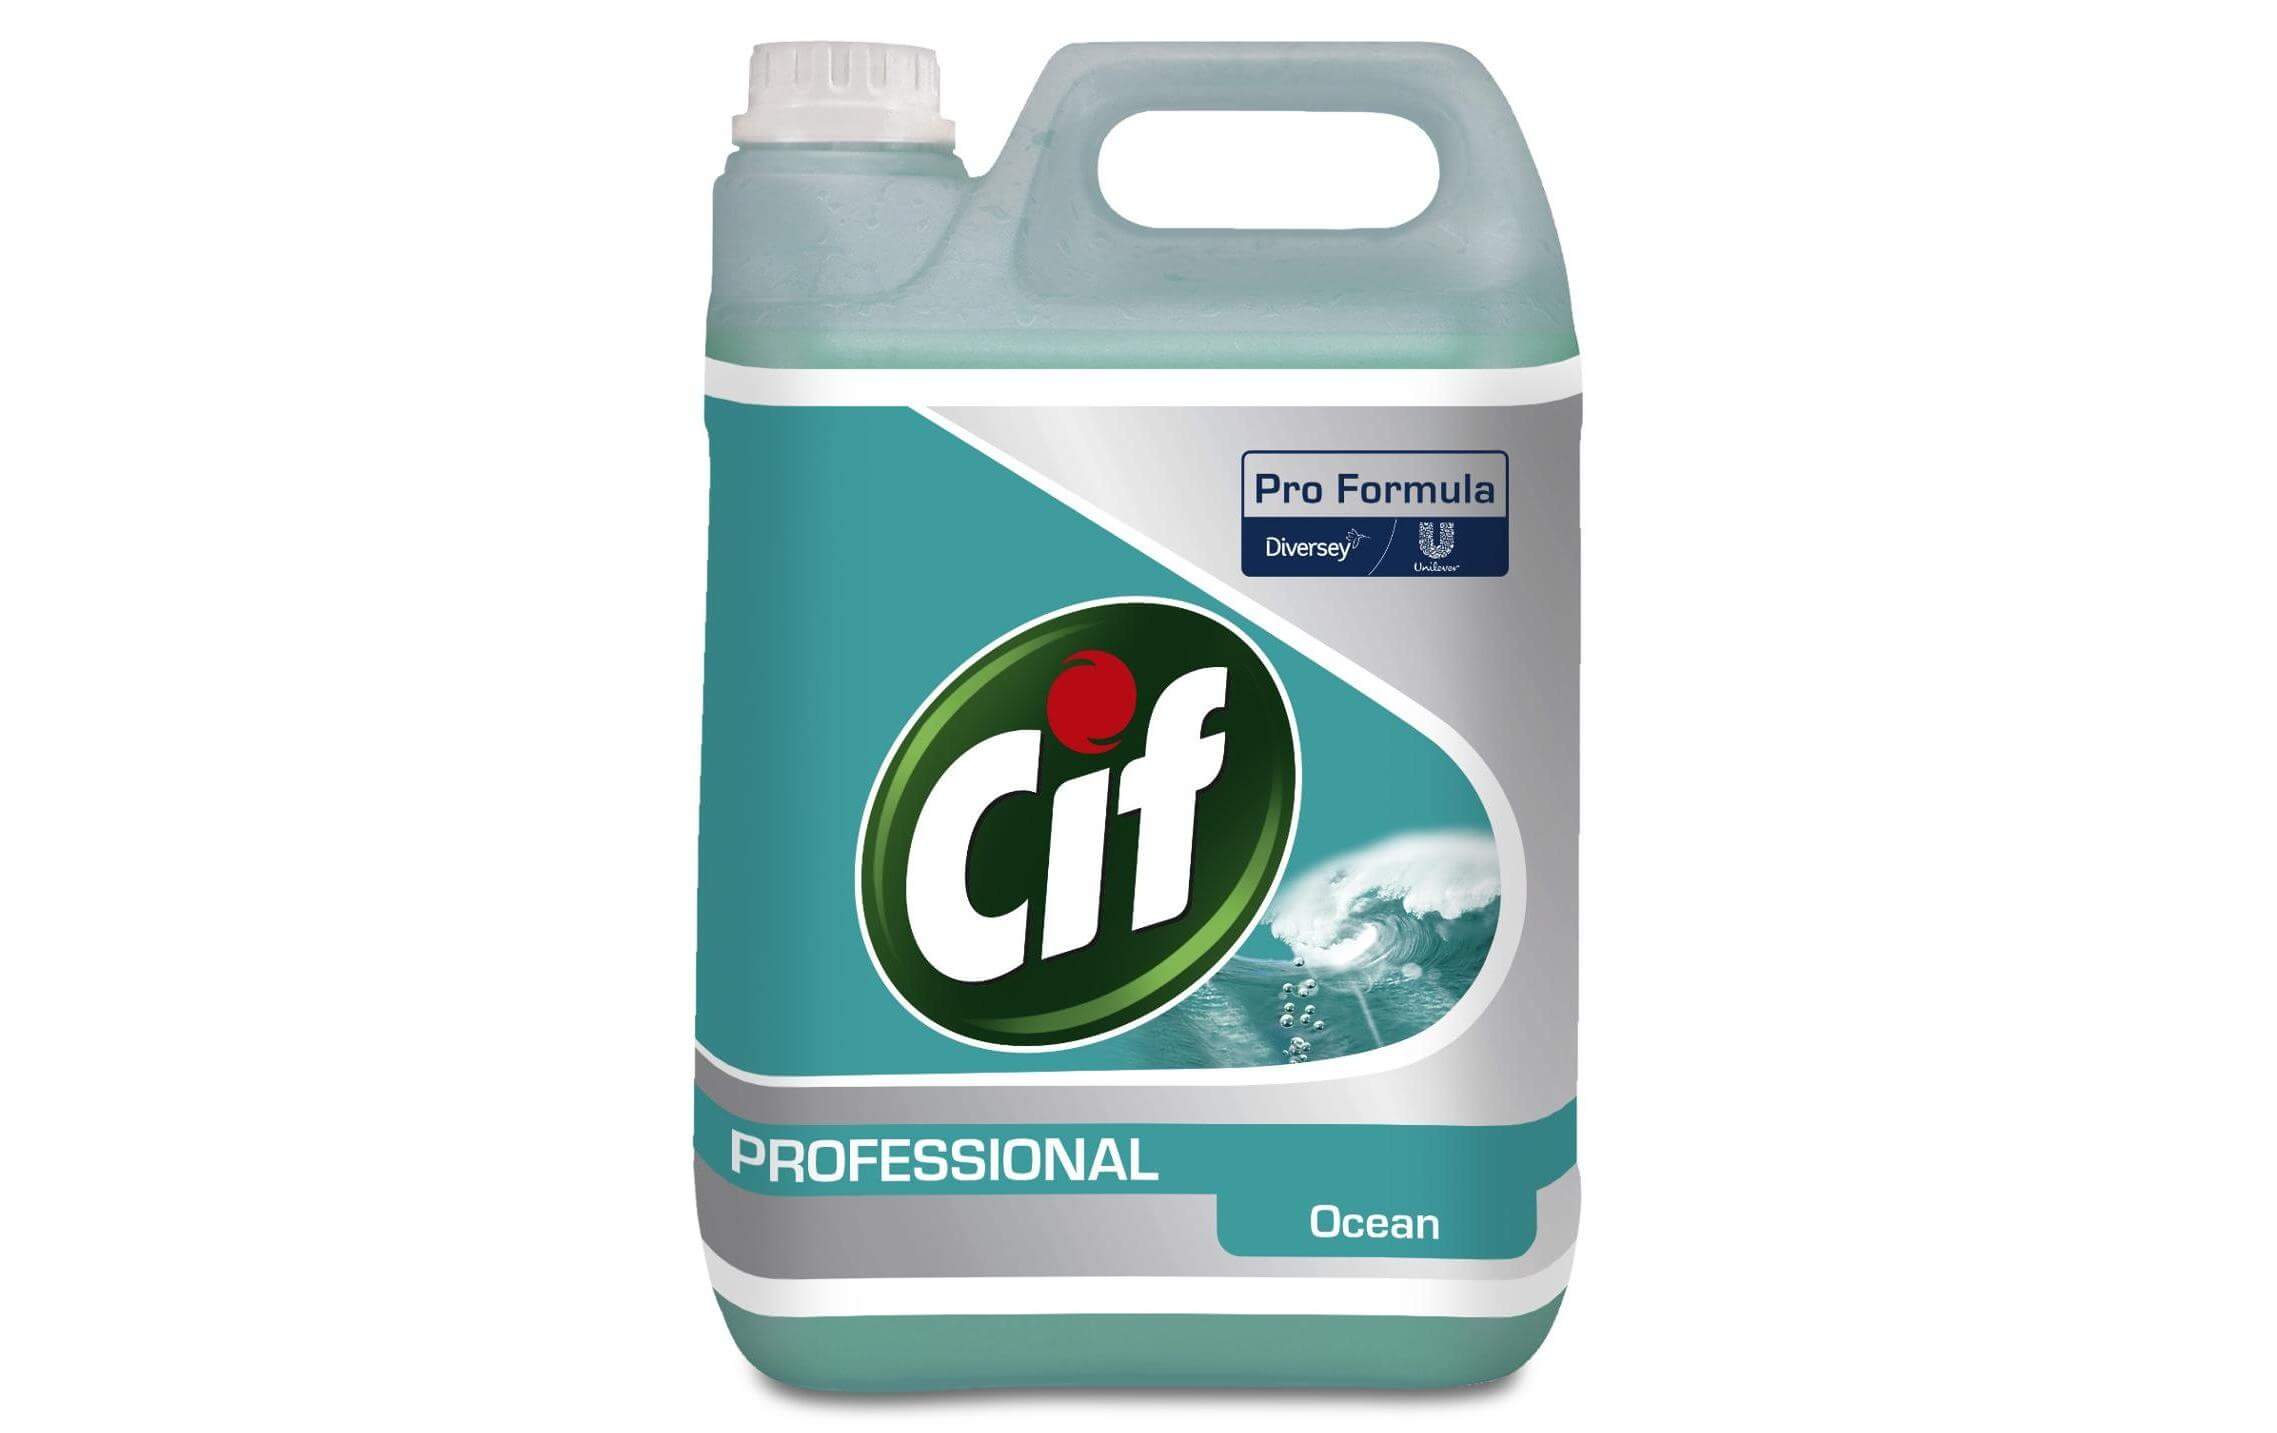 Diversey Pro Formula All Purpose Cleaner Cif Professional Oxy Gel